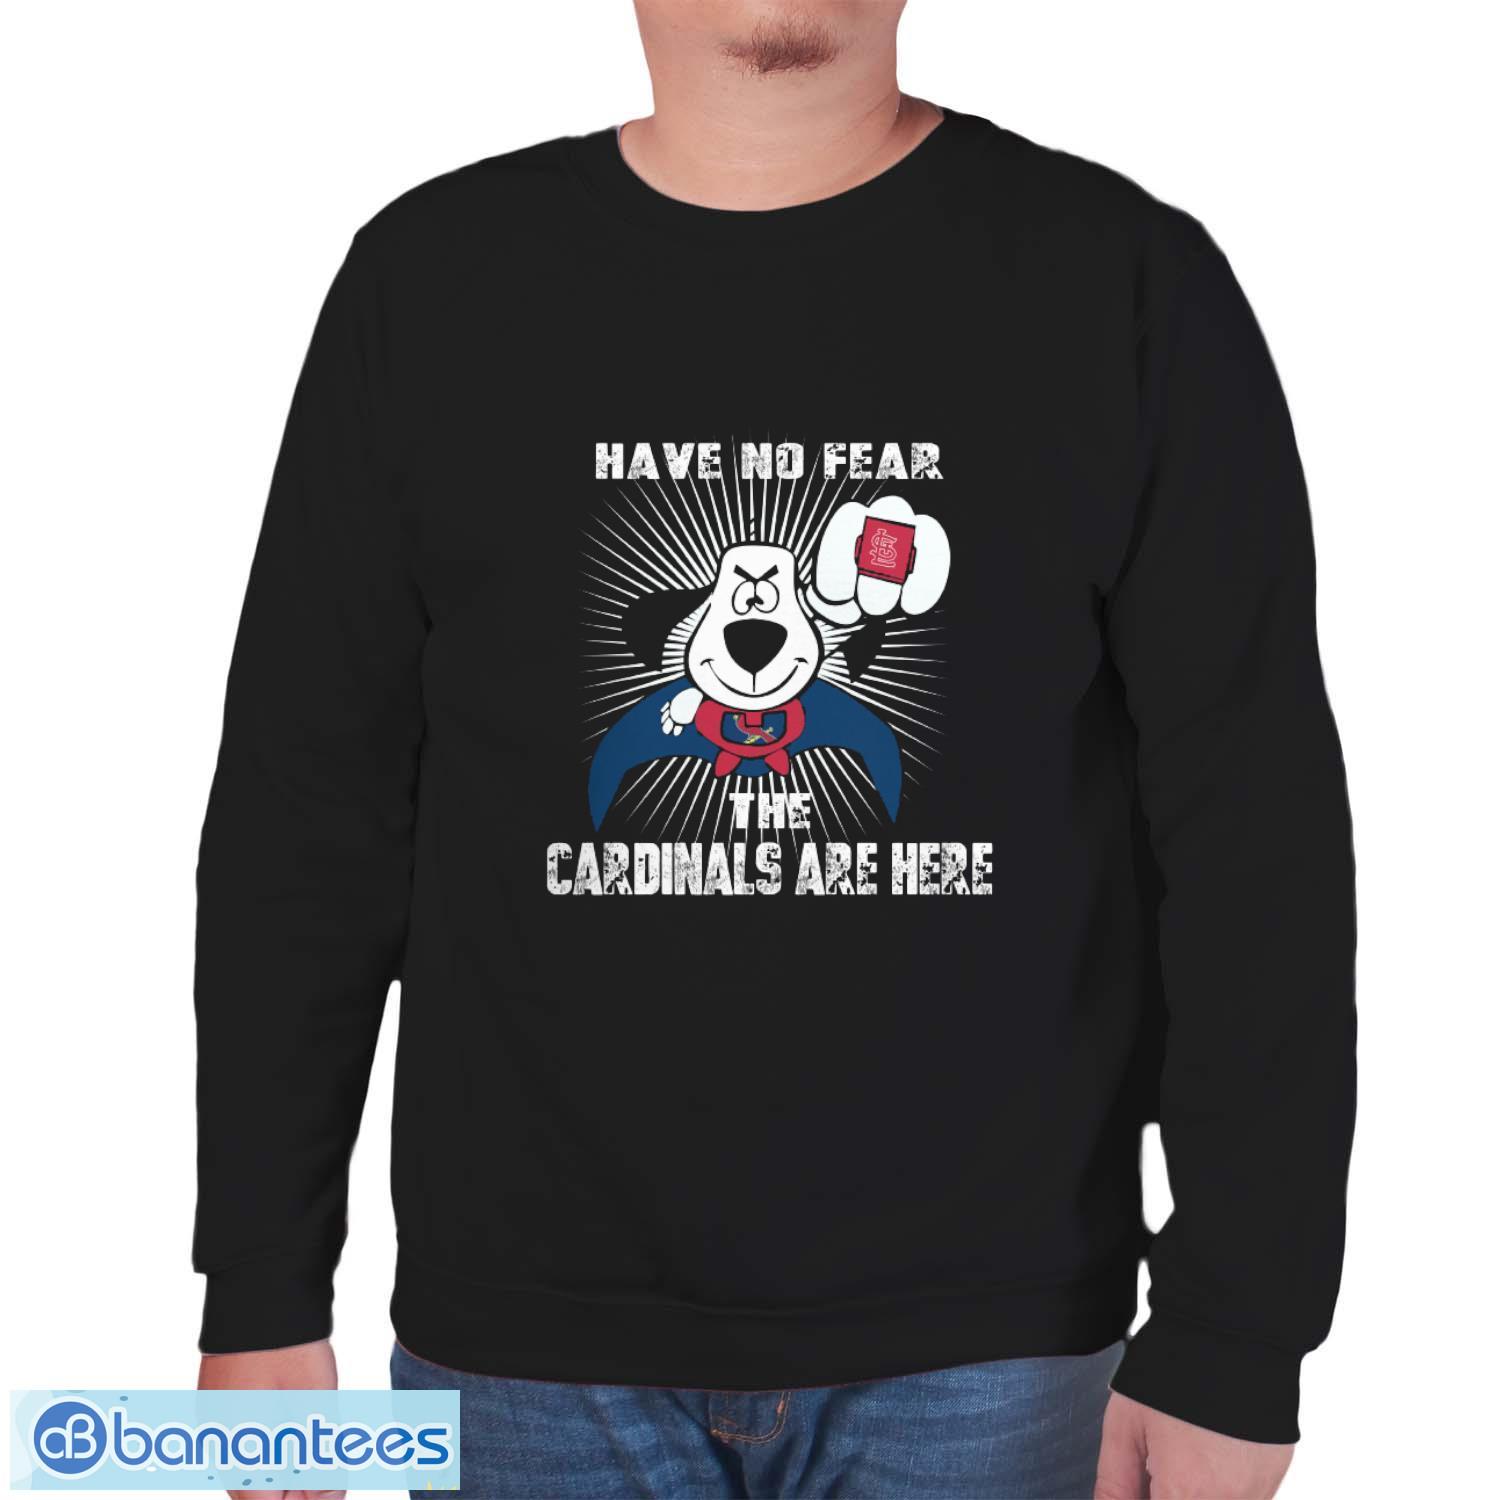 Have No Fear The St Louis Cardinals Are Here Funny Black T Shirt Sweatshirt  For Fans - Banantees